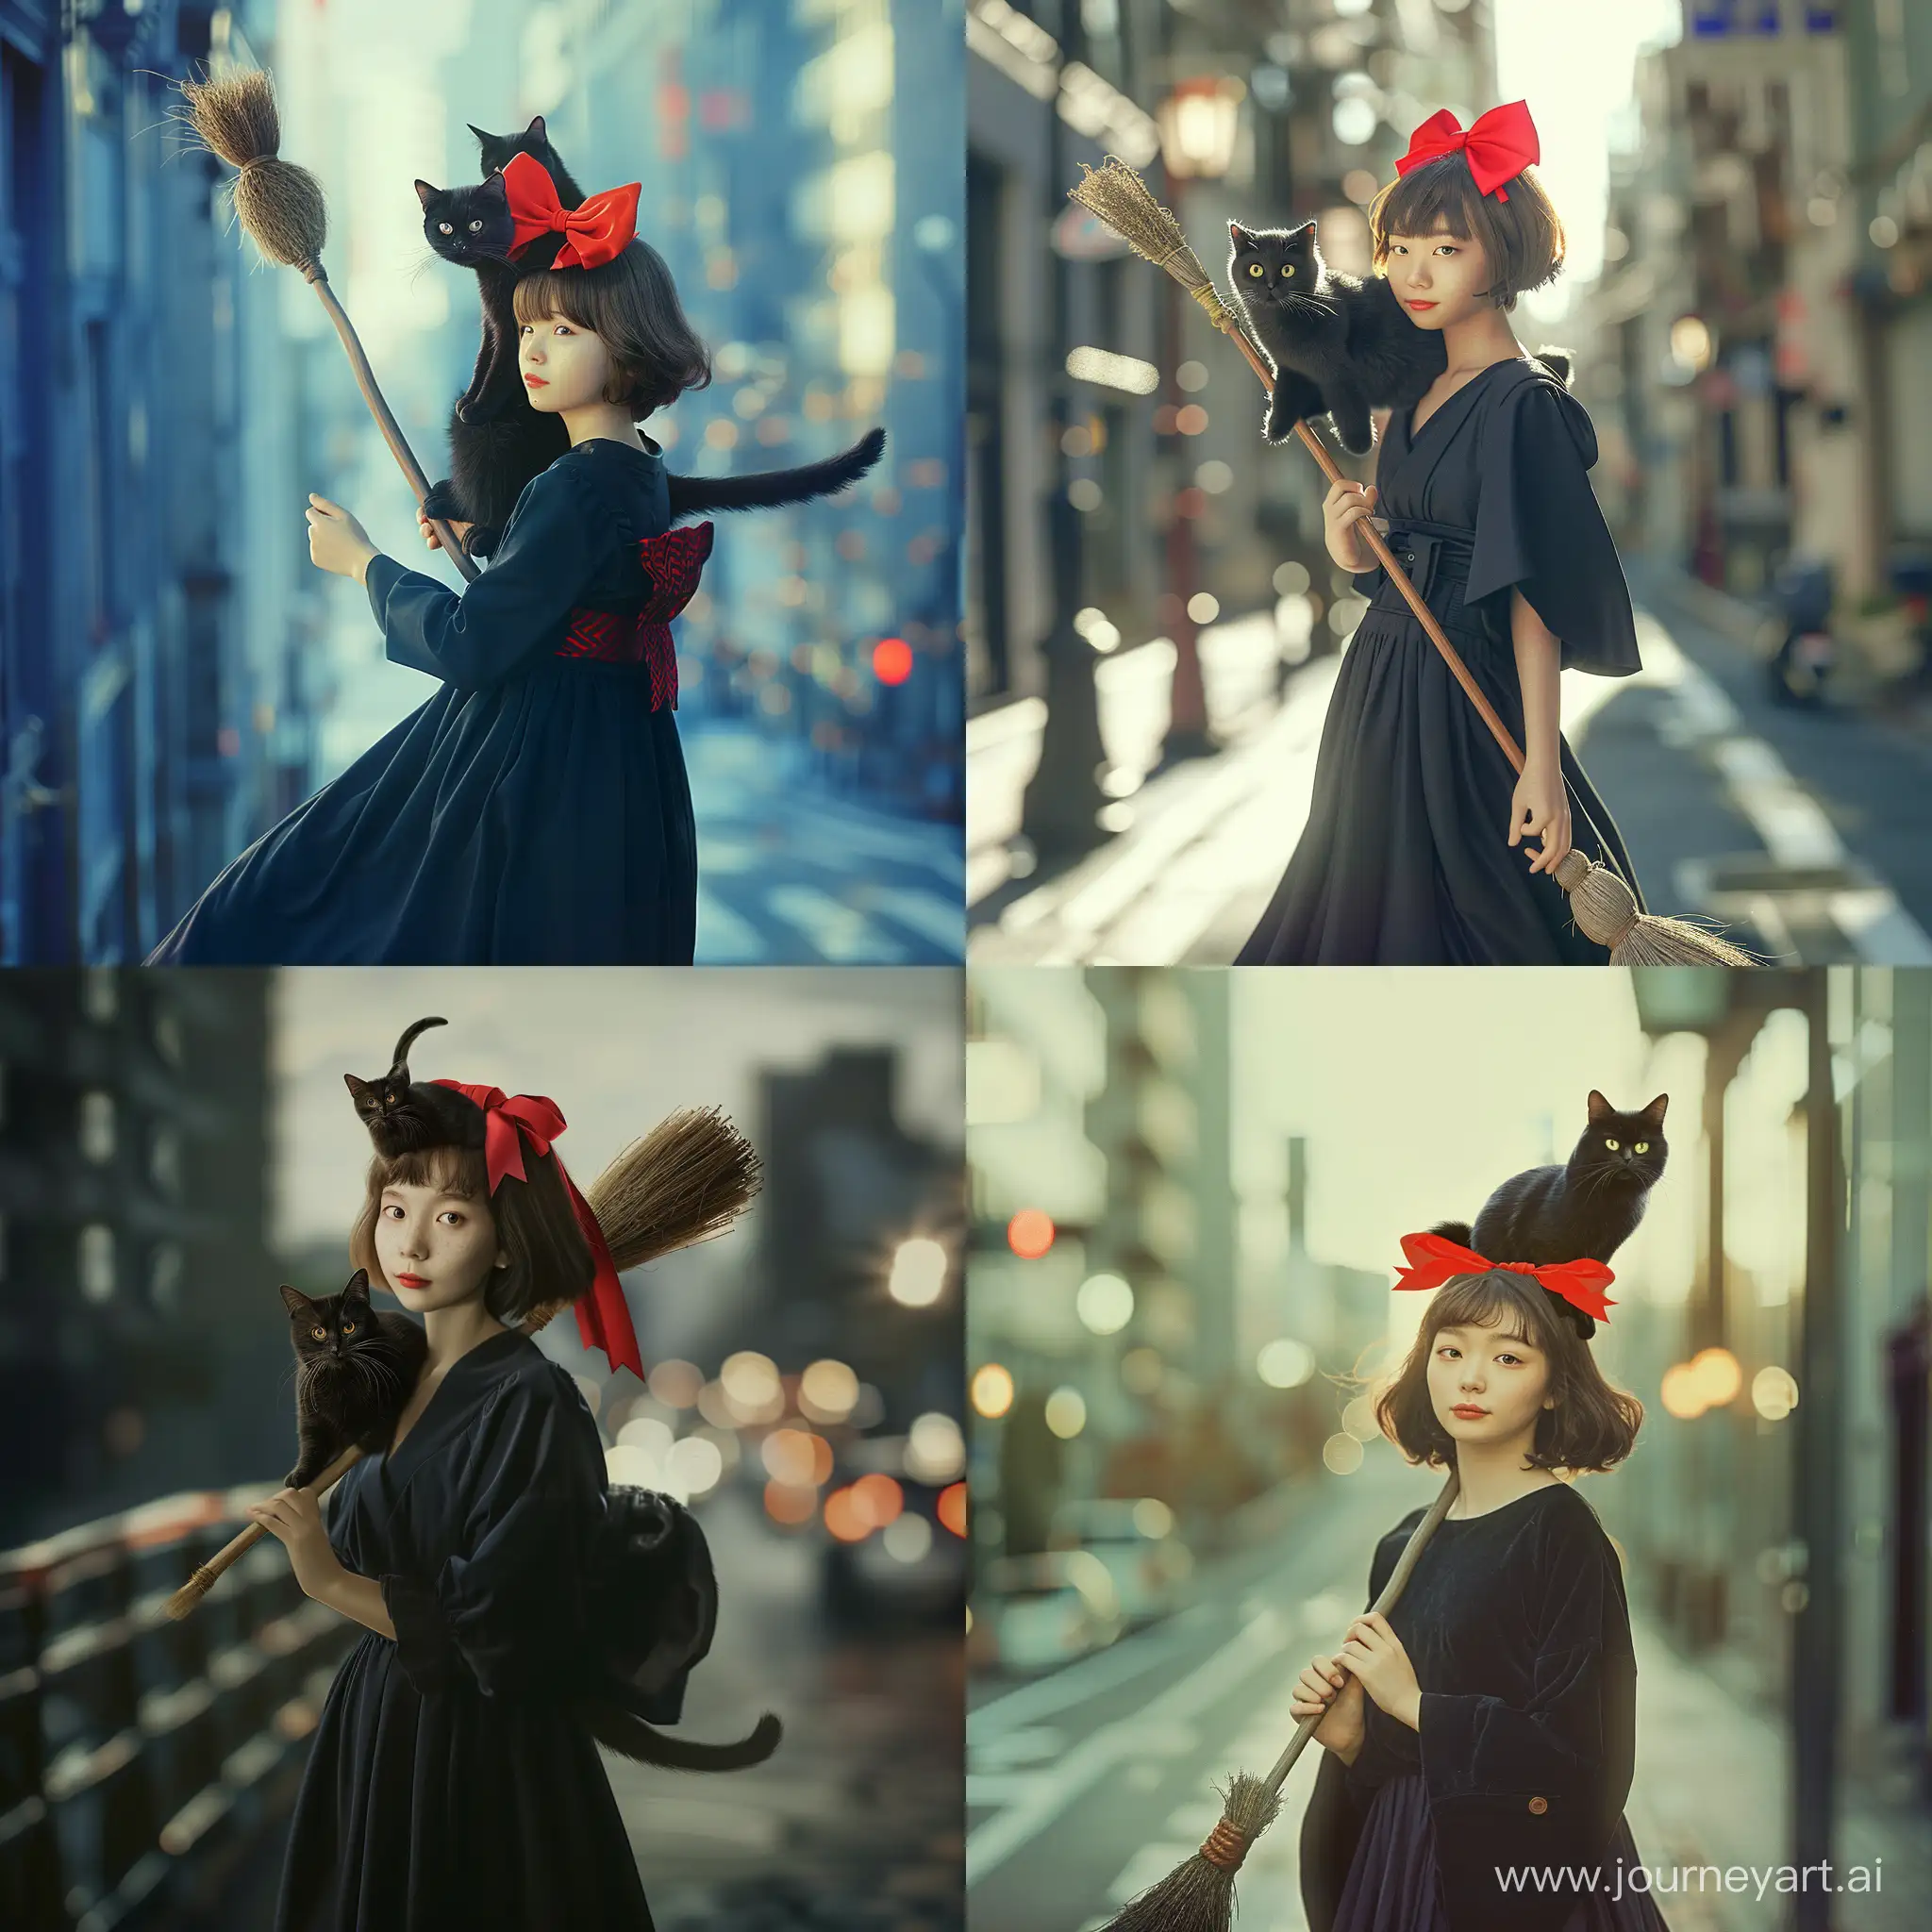 Enchanting-Journey-15YearOld-Japanese-Witch-Soaring-with-Black-Cat-Over-City